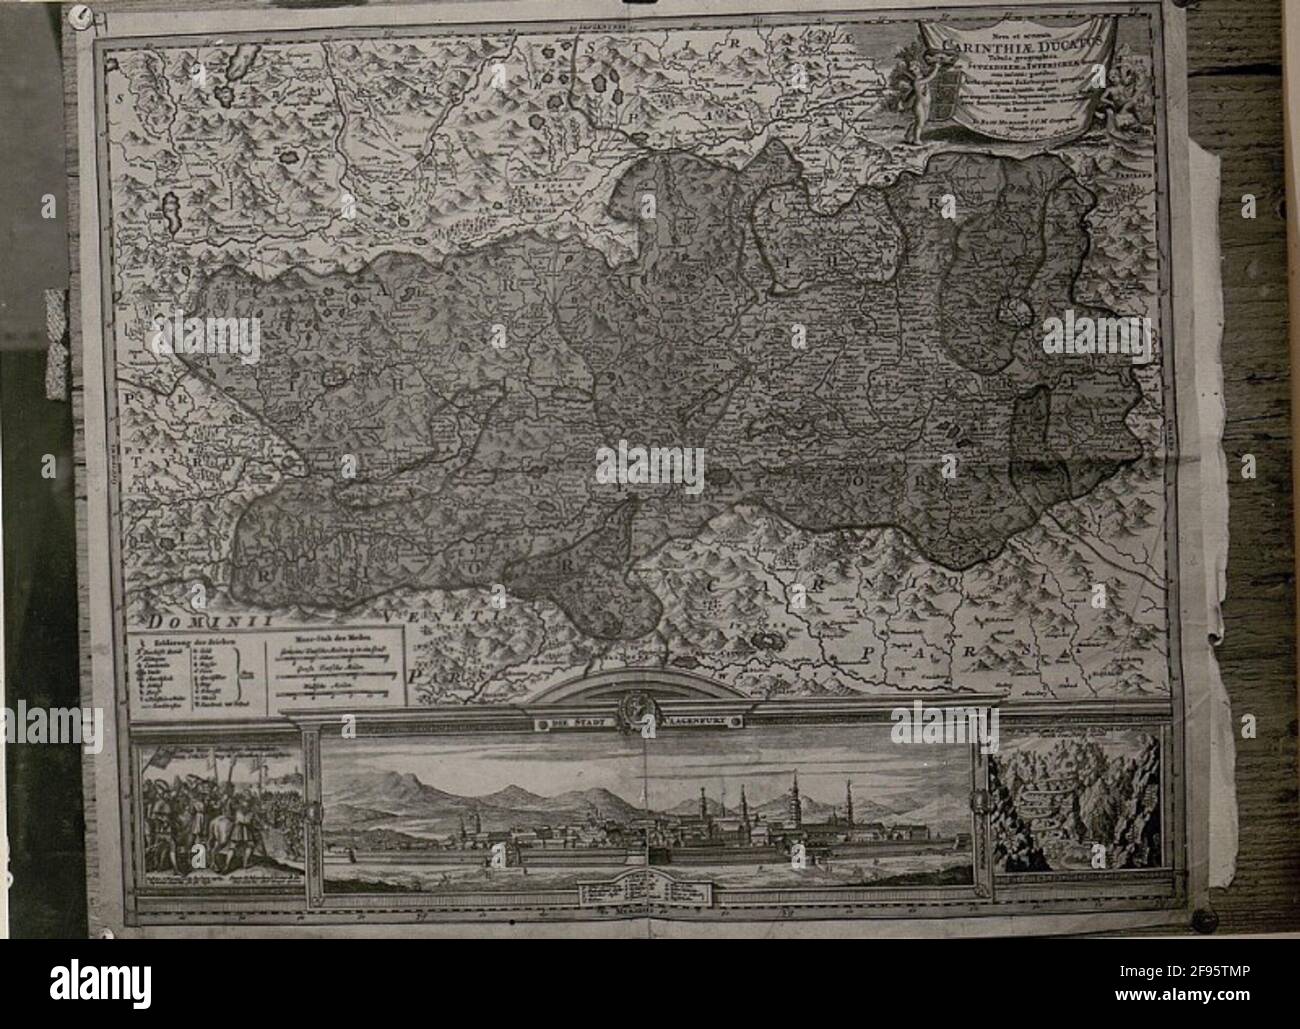 Reproduction of the map of Carinthia from the museum in Villach. . Stock Photo